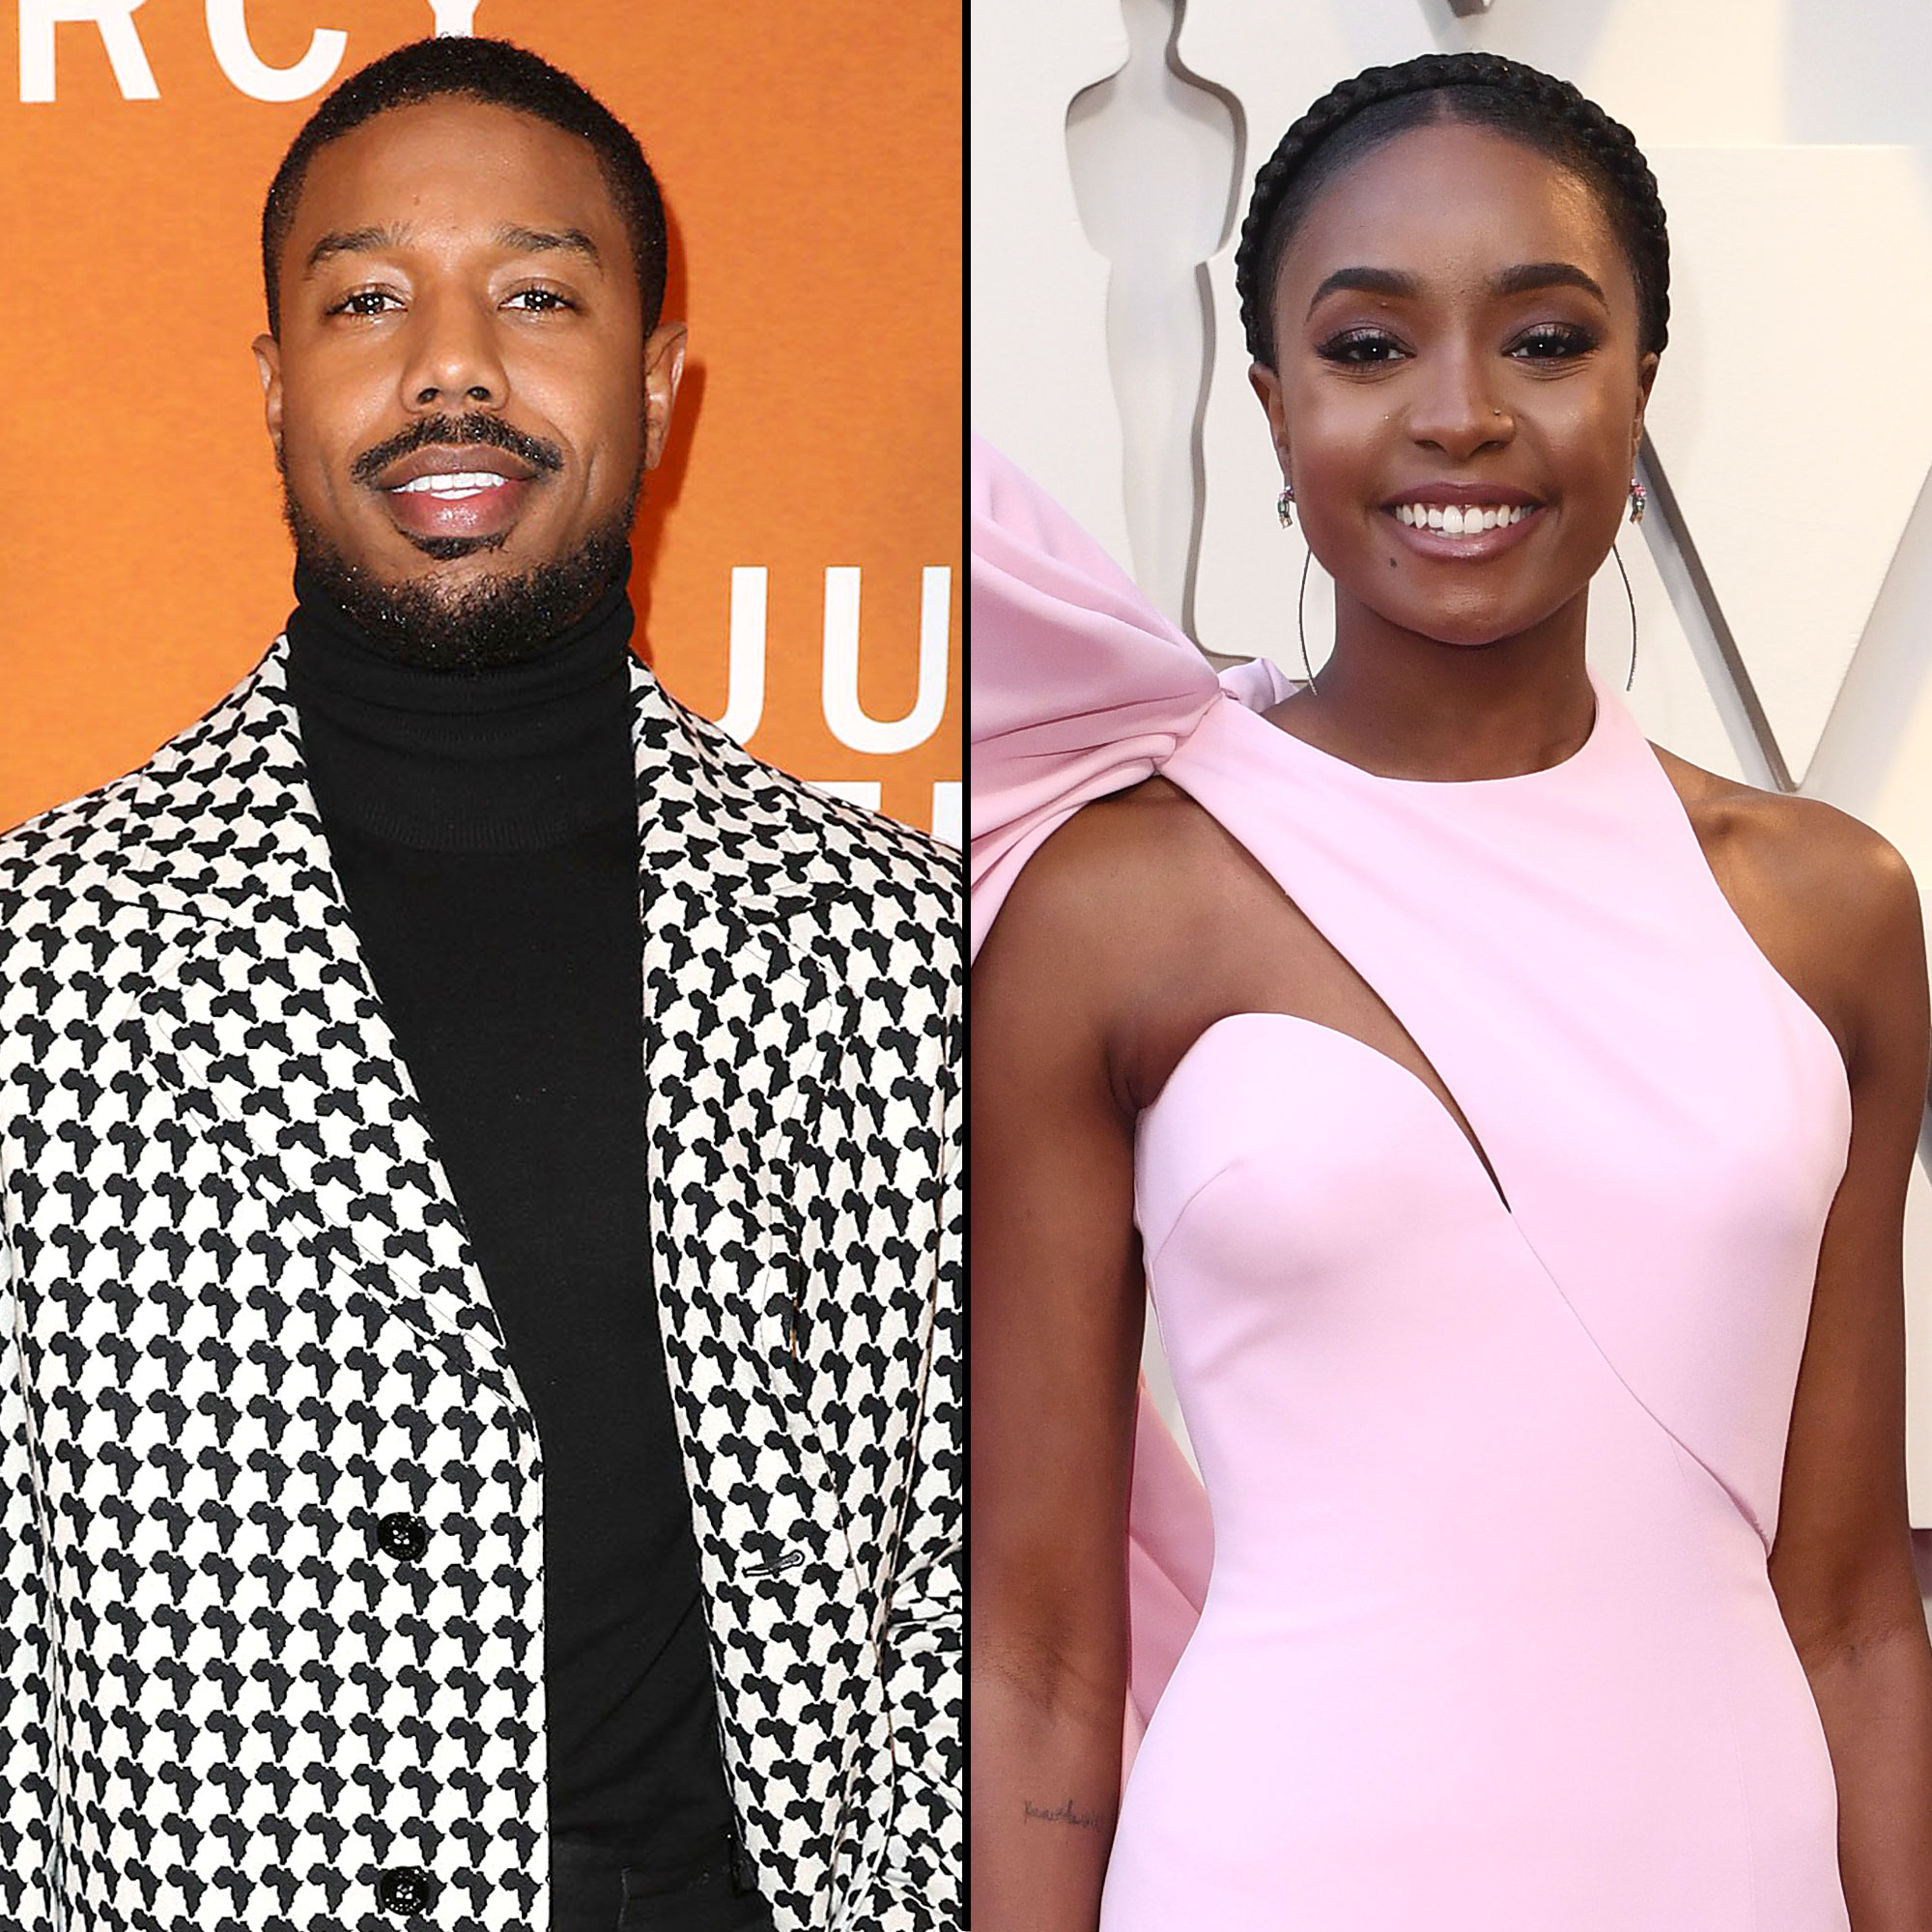 Who is Michael B Jordan and does he have a girlfriend?